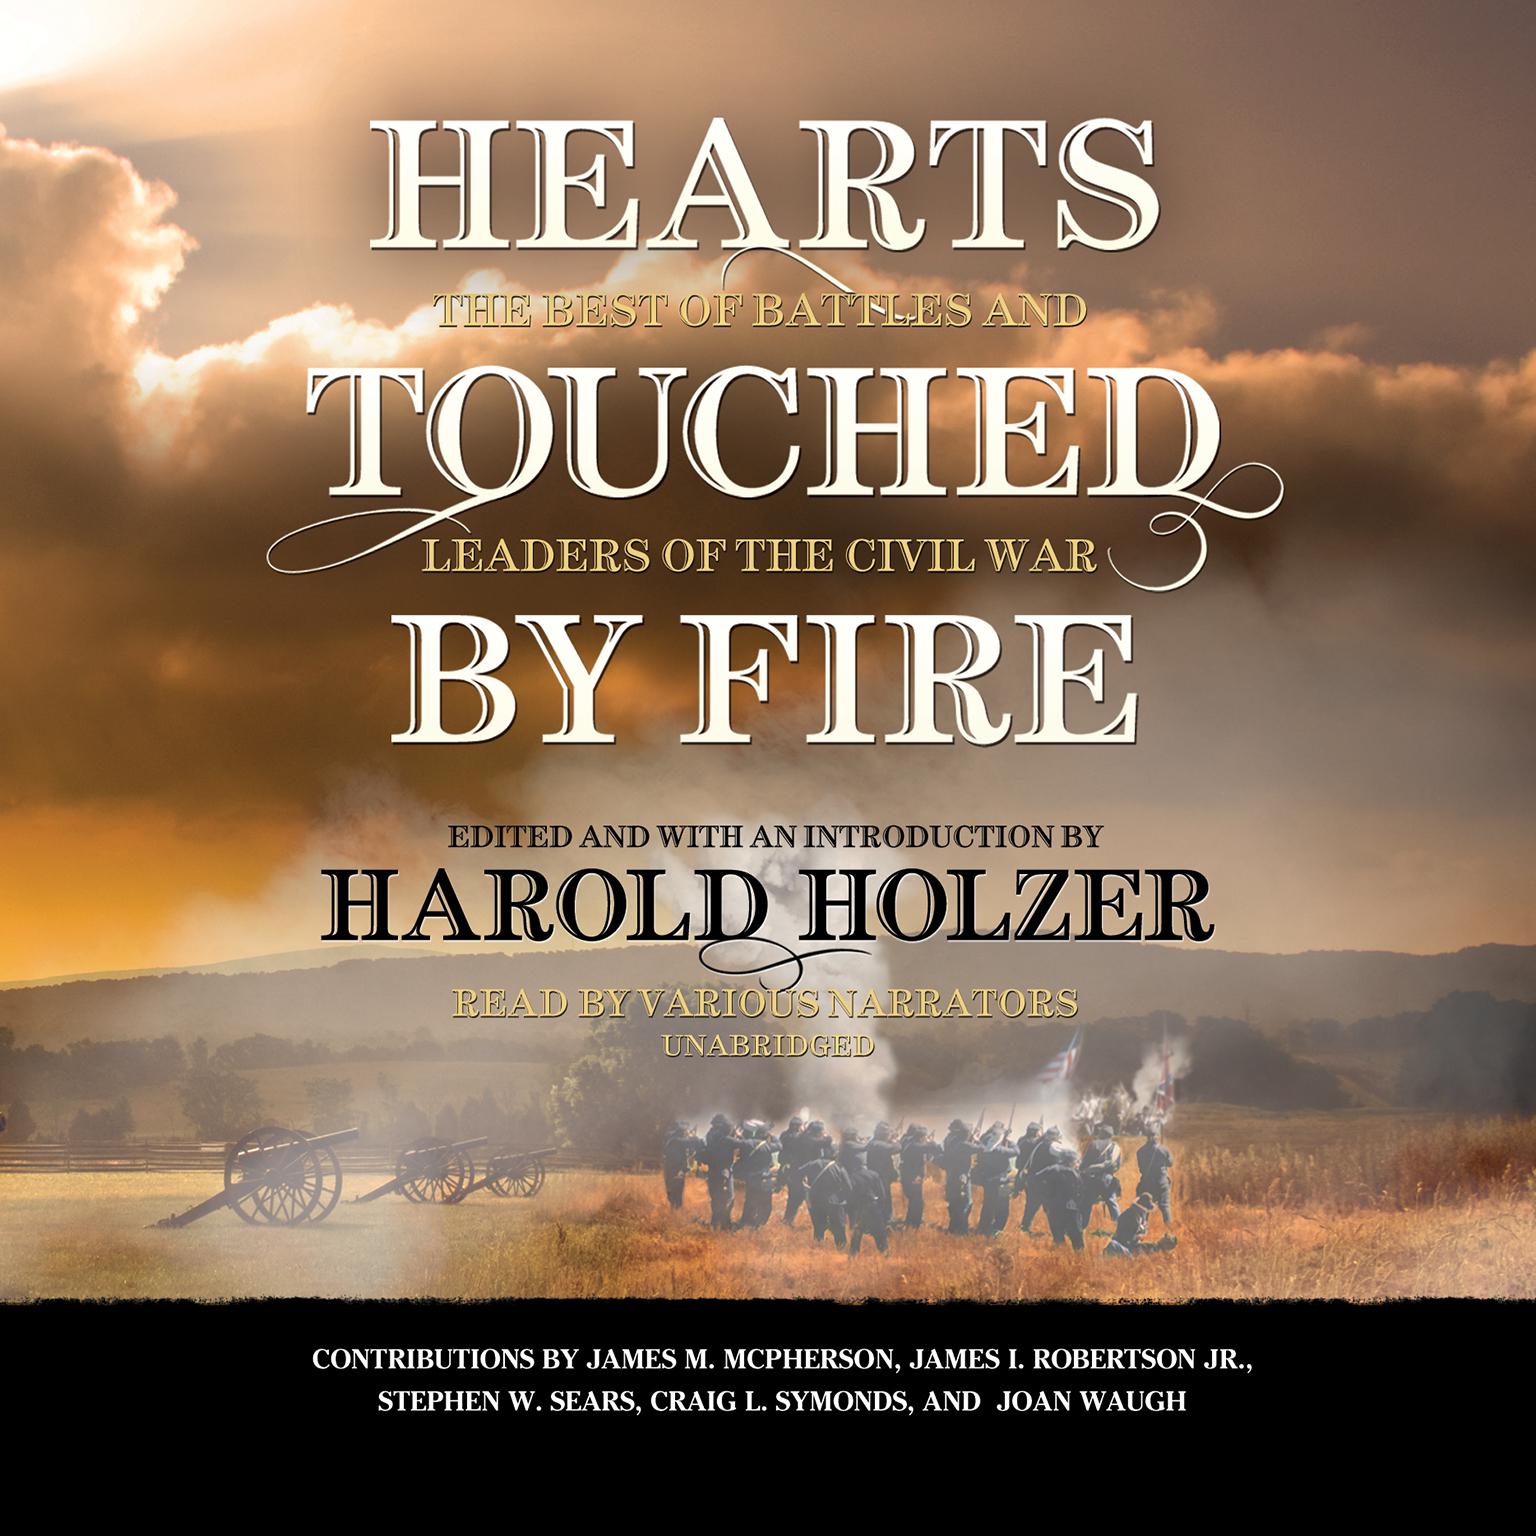 Hearts Touched by Fire: The Best of Battles and Leaders of the Civil War Audiobook, by Harold Holzer